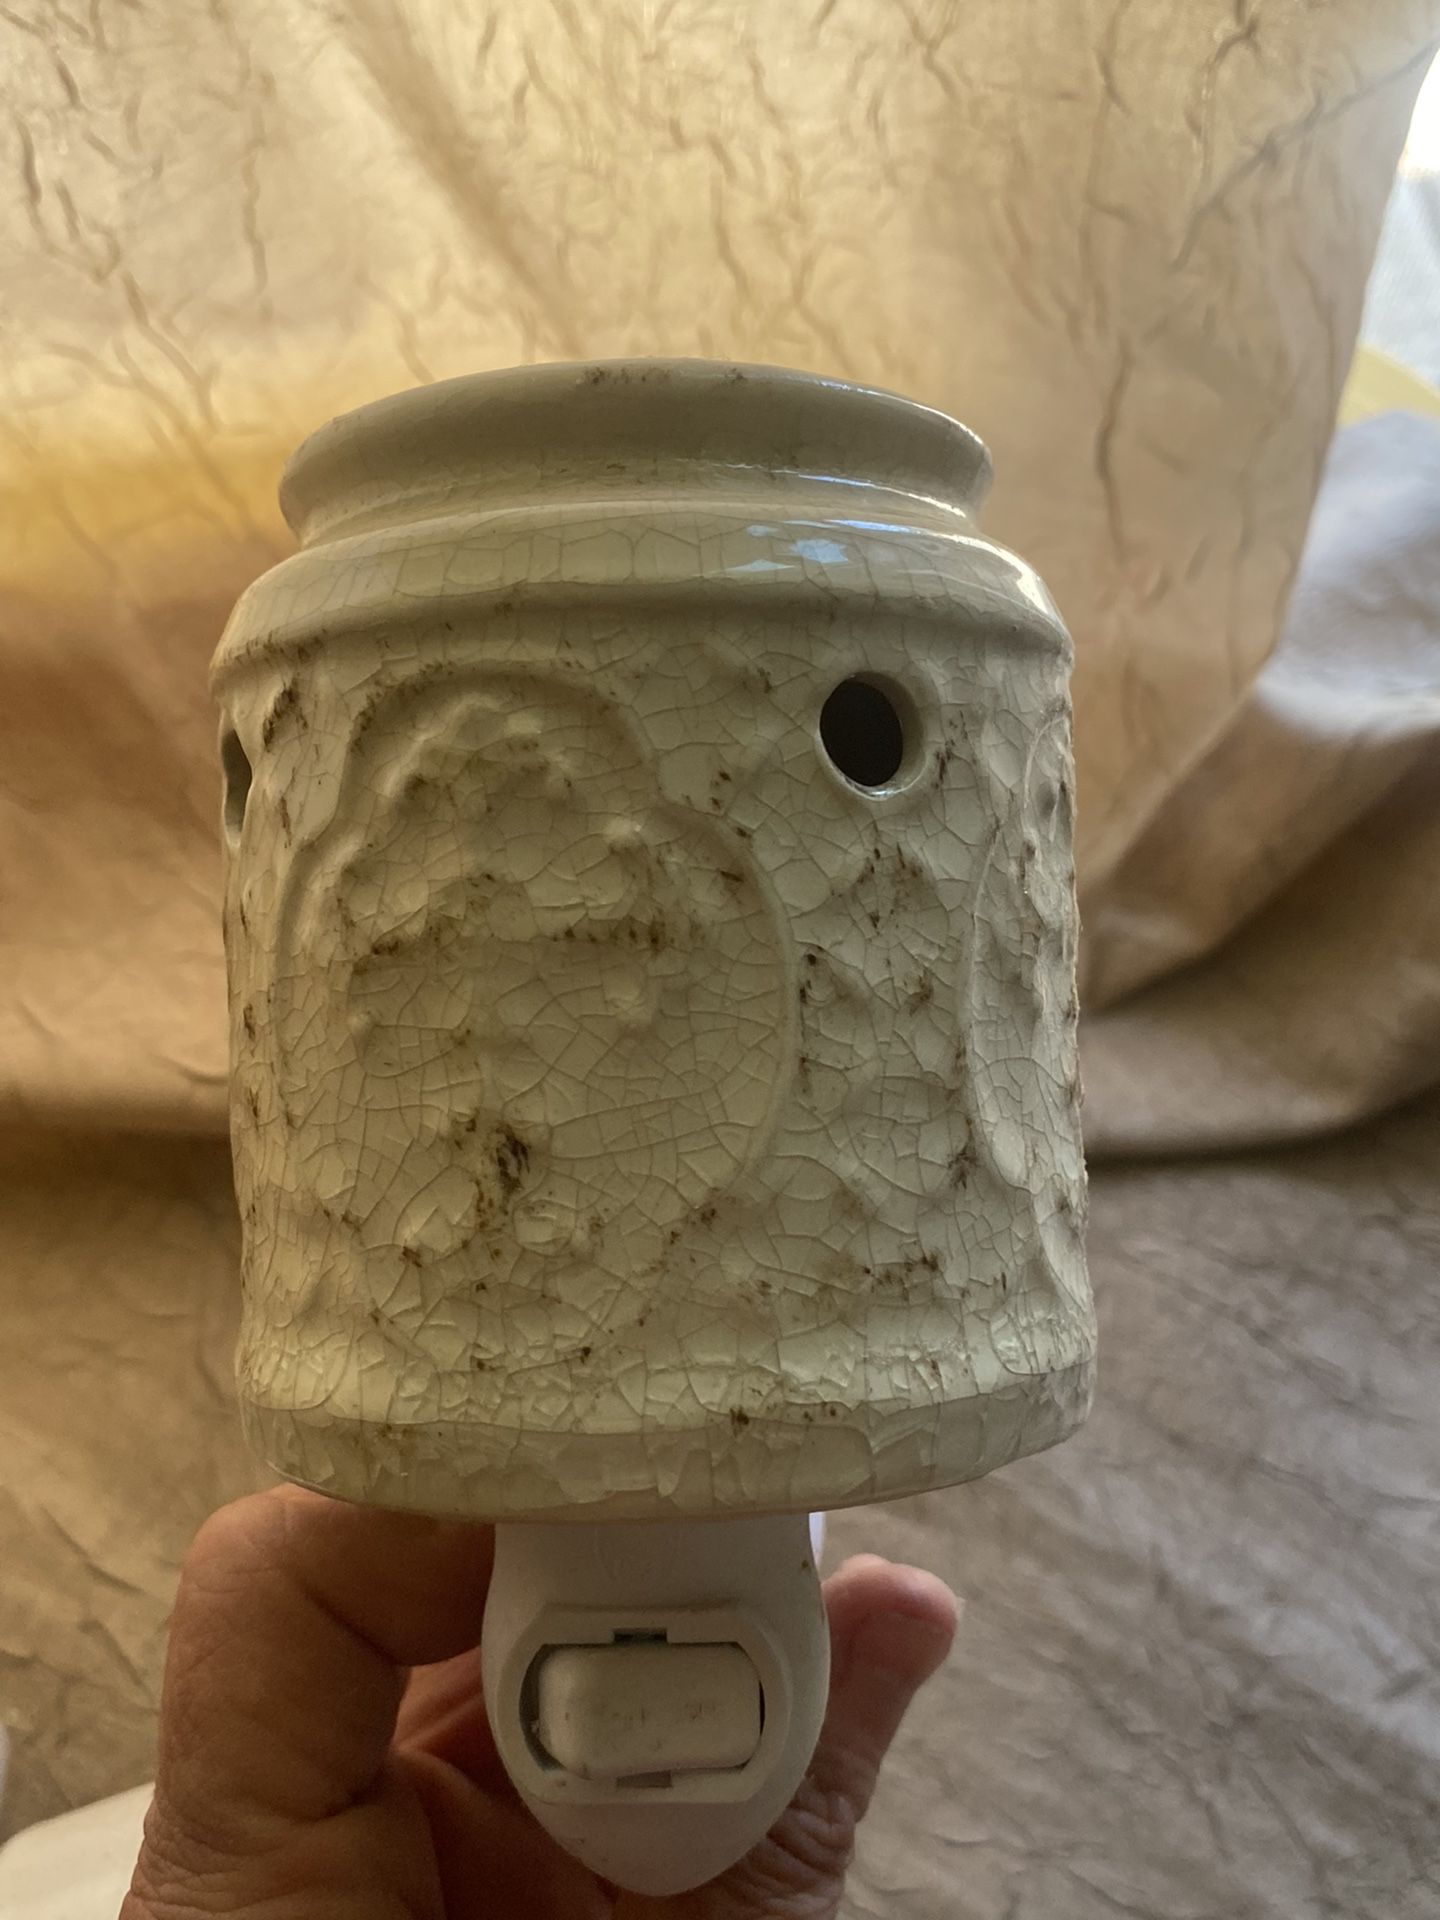  Scentsy Candle Wax Warmer Lamps With Wax Melts 